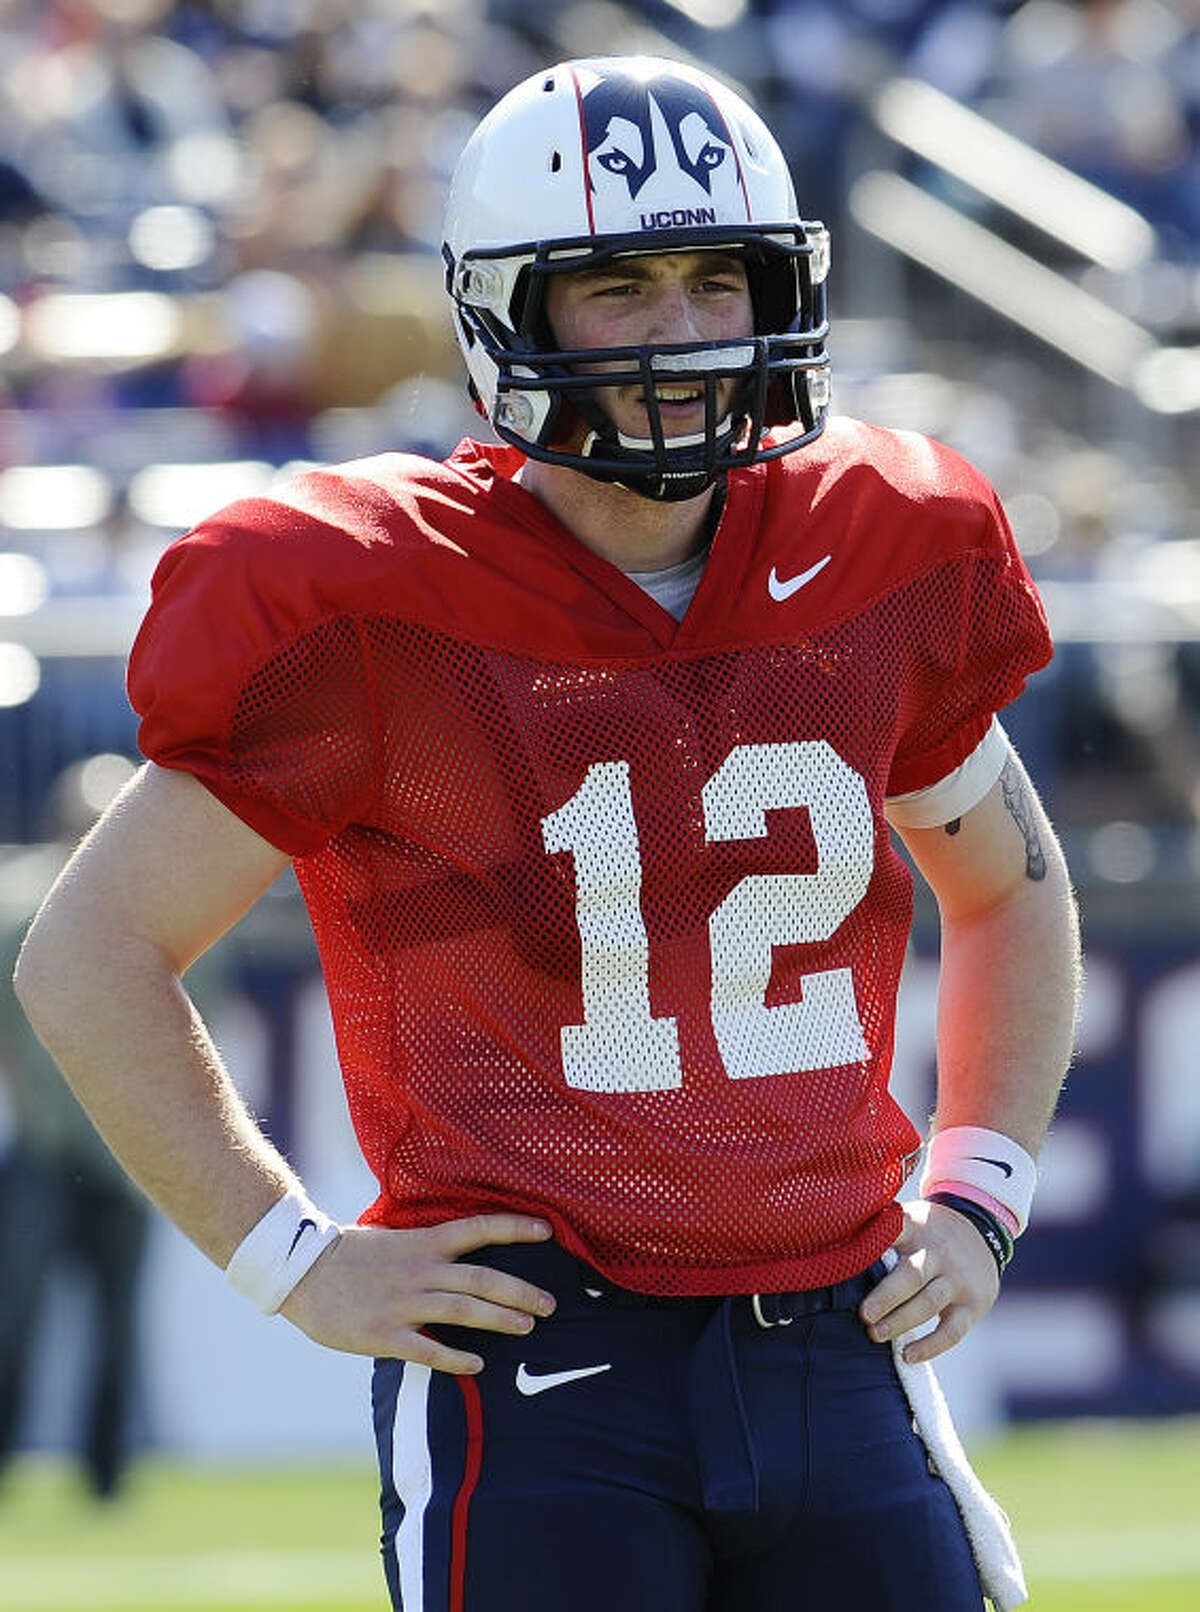 Connecticut quarterback Casey Cochran listens to instructions from a coach during the first half of UConn's Blue-White spring NCAA college football game at Rentschler Field, Saturday, April 12, 2014, in East Hartford, Conn. (AP Photo/Jessica Hill)